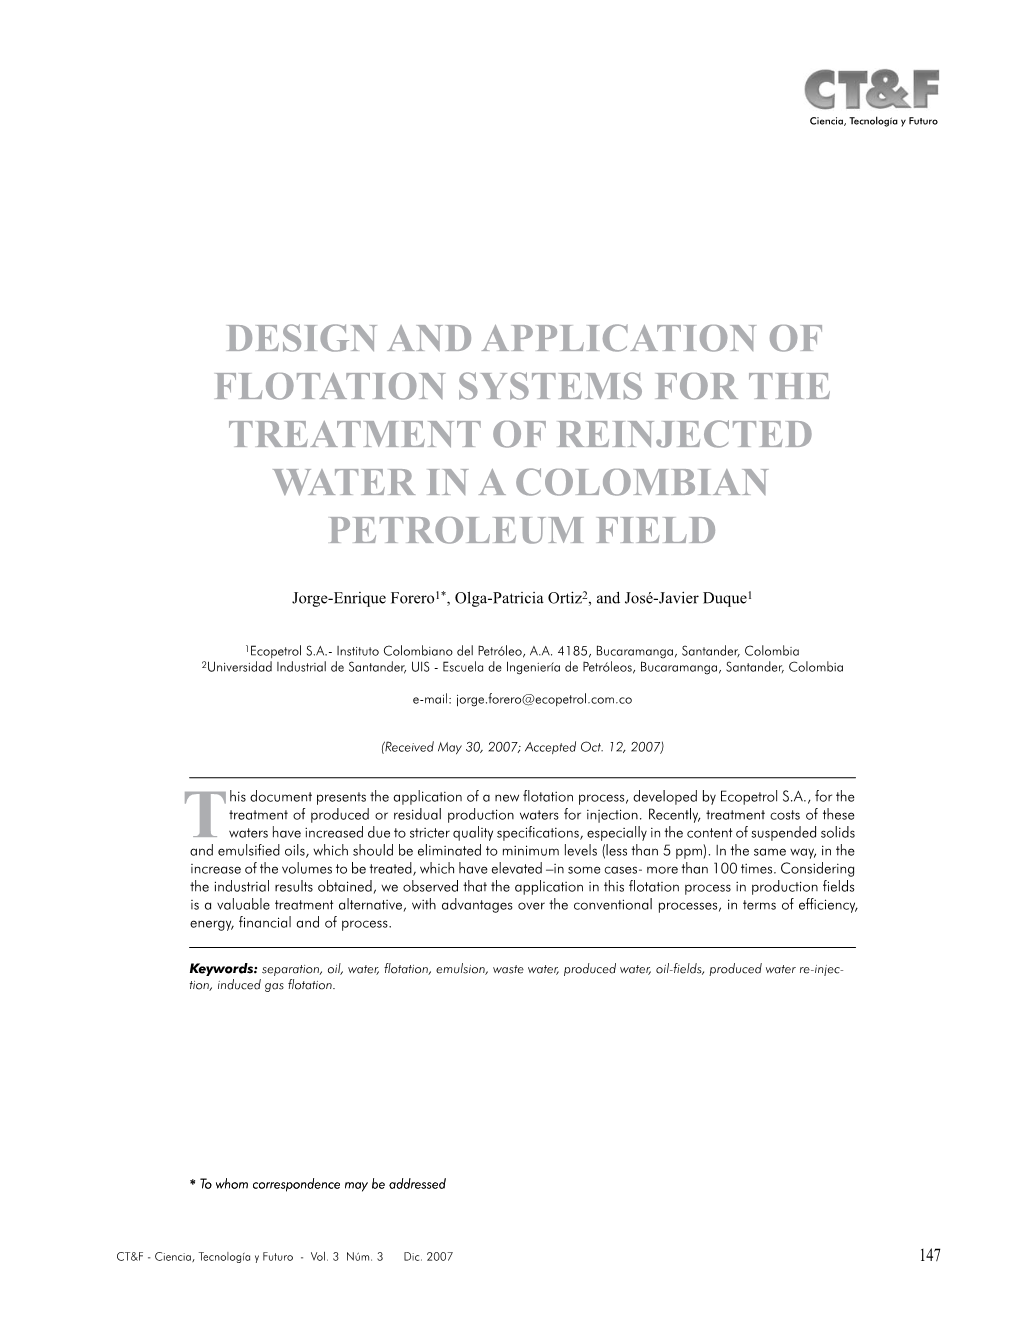 Design and Application of Flotation Systems for the Treatment of Reinjected Water in a Colombian Petroleum Field